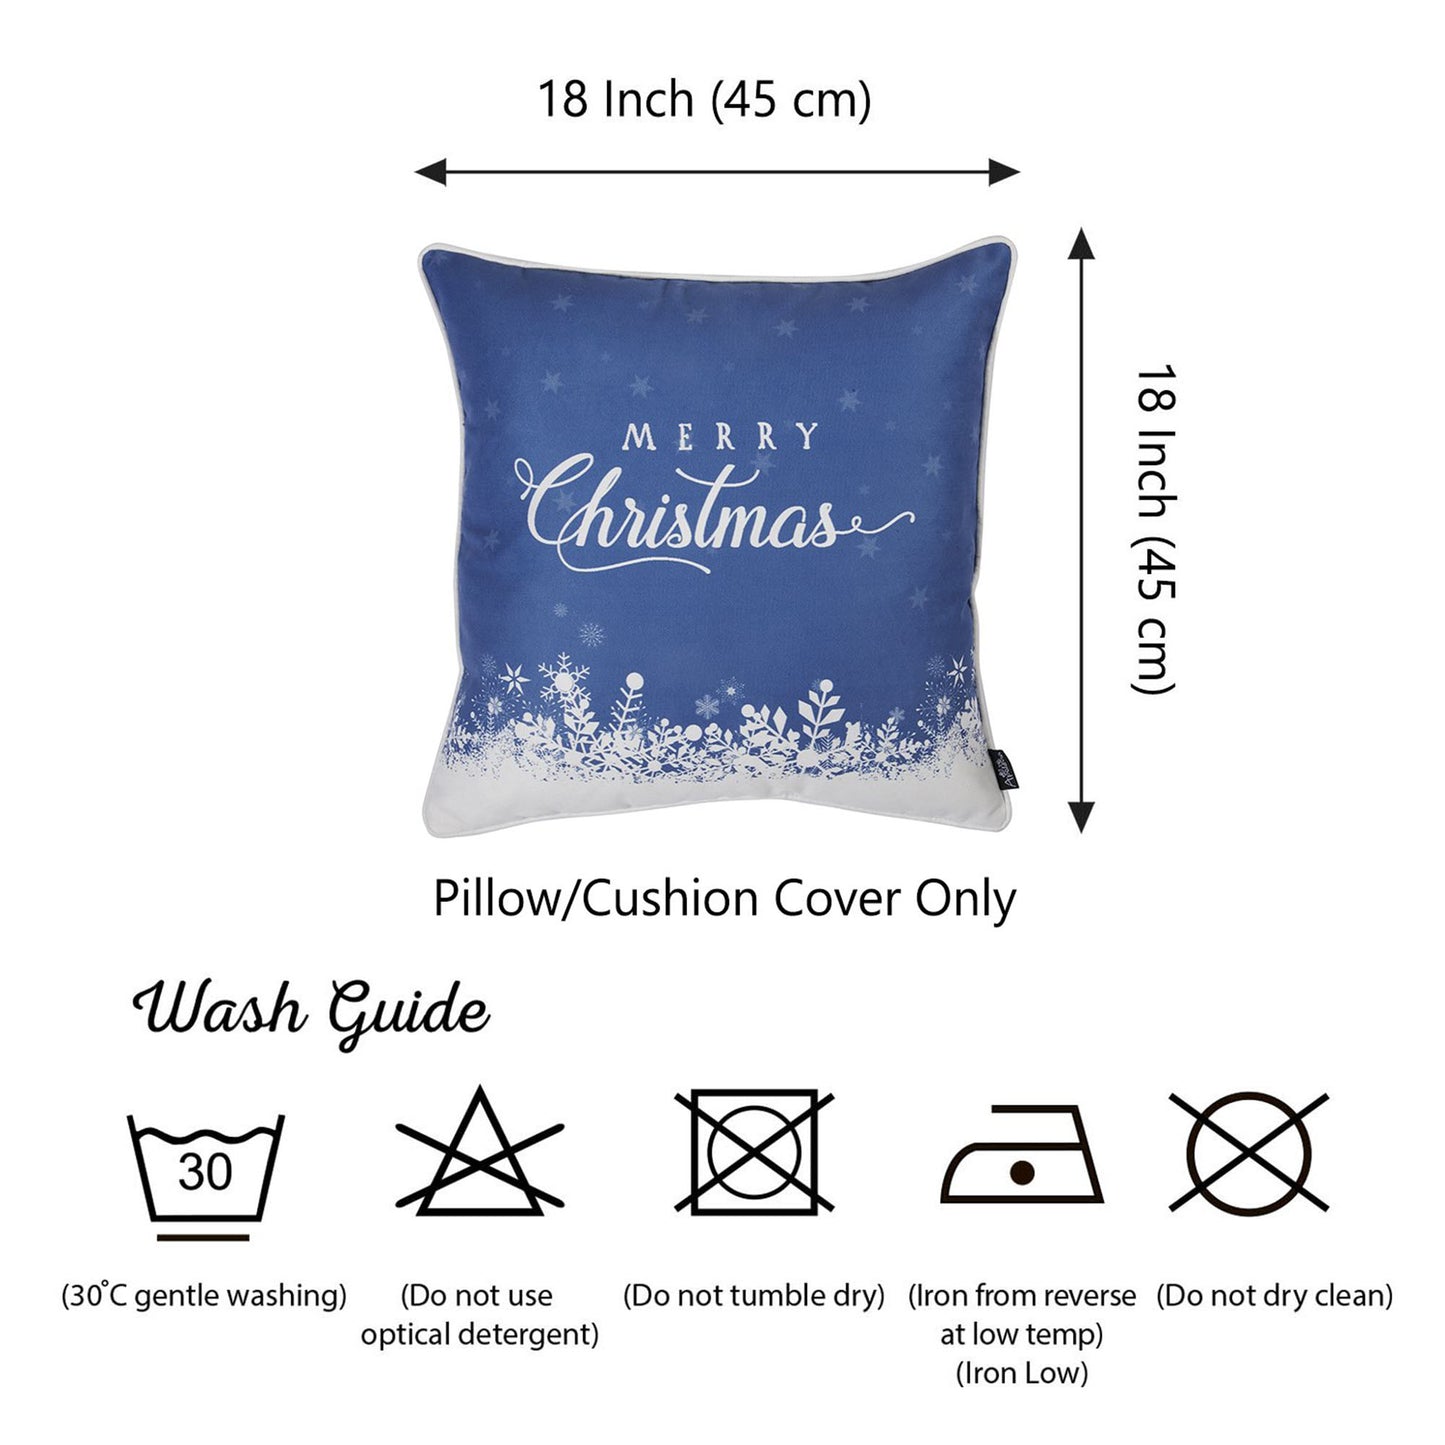 Decorative Merry Christmas Single Throw Pillow Cover 18" x 18" Blue & White Square for Couch, Bedding - Apolena